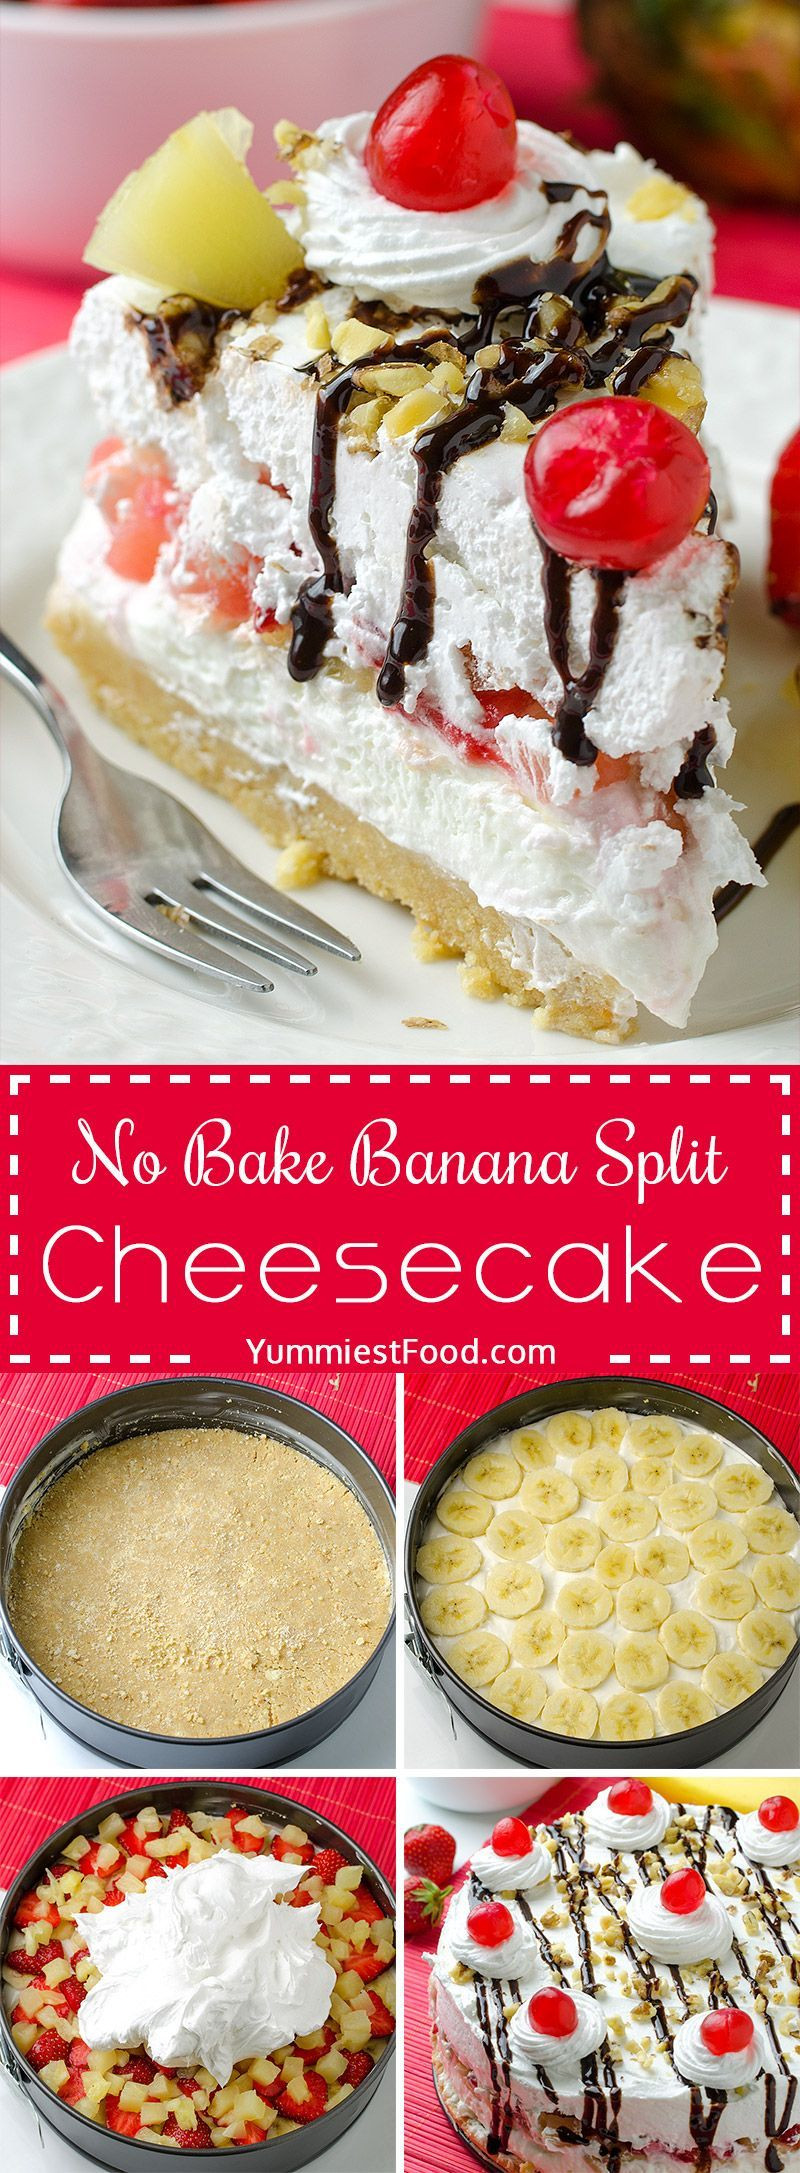 Quick And Easy Summer Desserts
 NO BAKE BANANA SPLIT CHEESECAKE Easy and quick summer